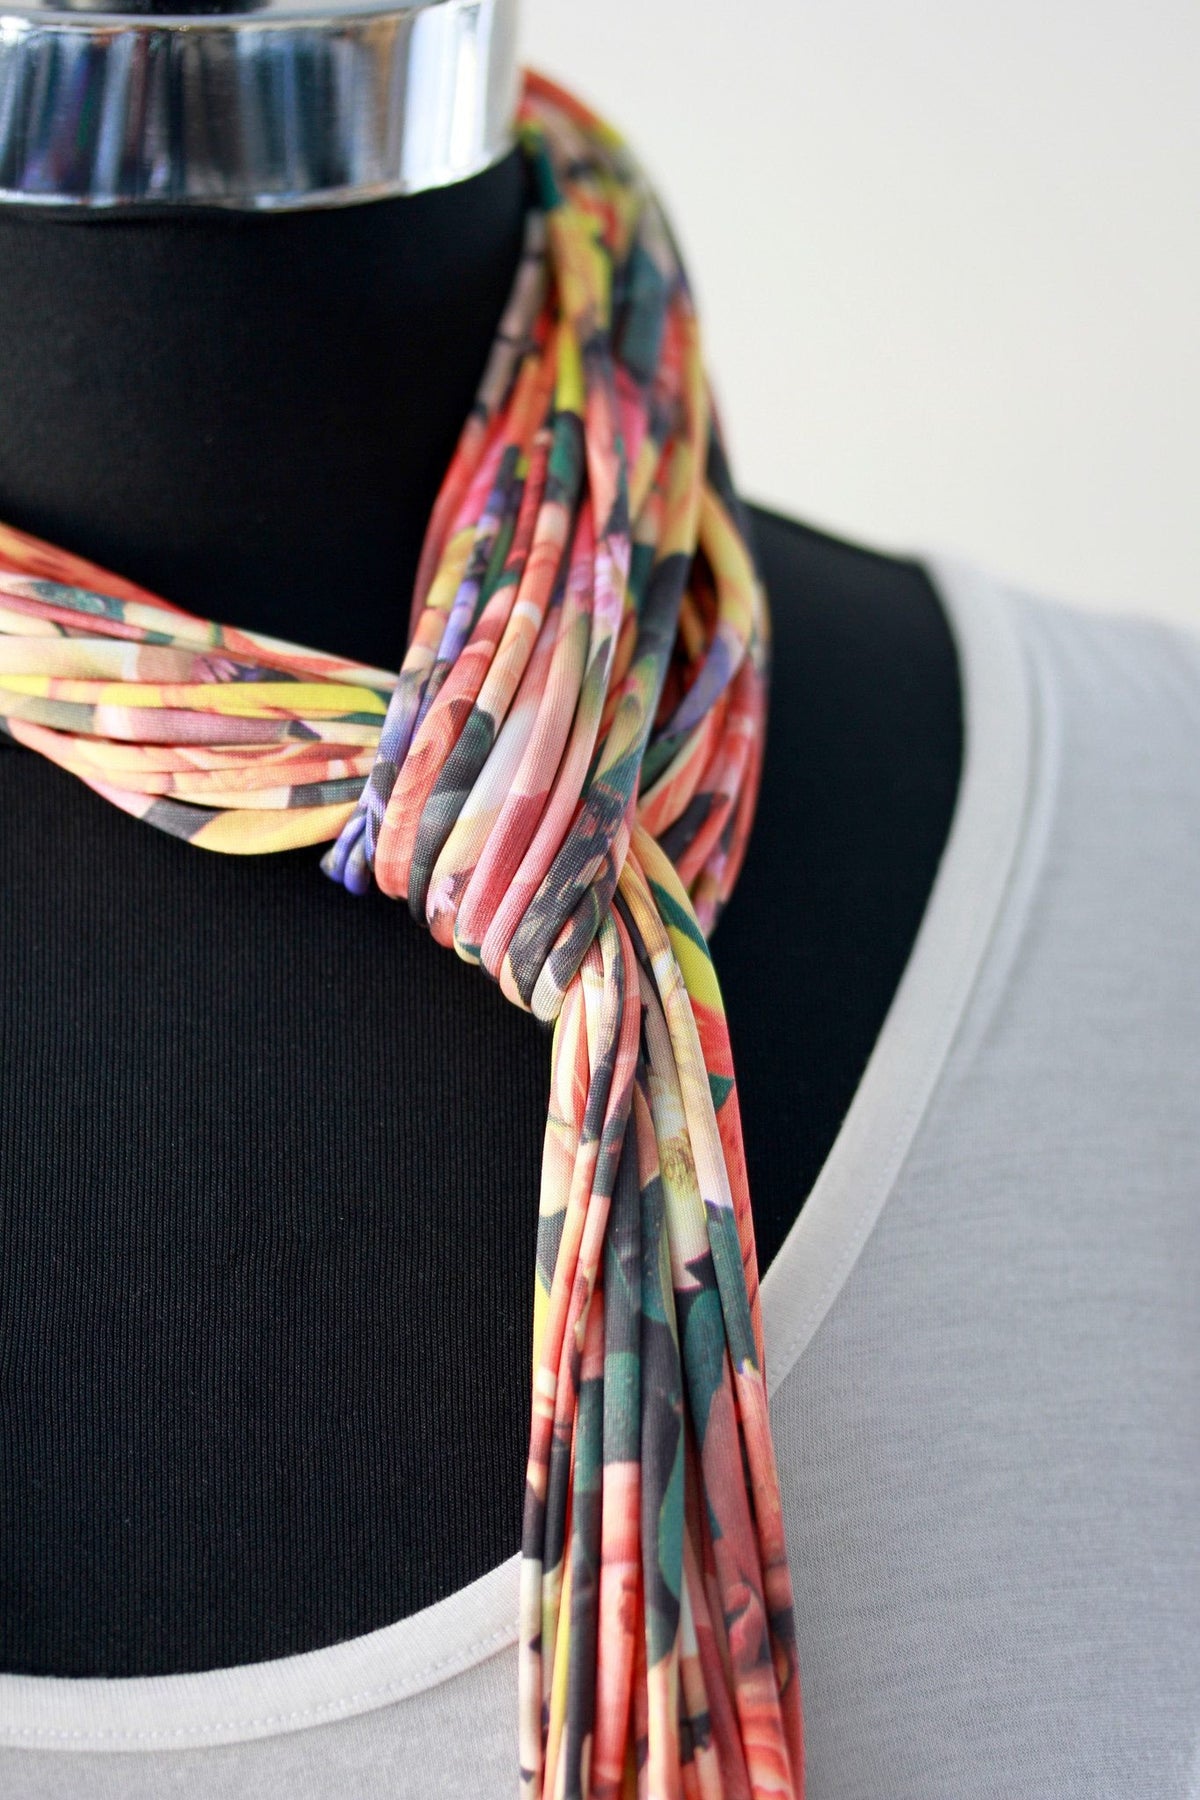 Handmade Floral Peach Infinity Scarf Necklace for Women